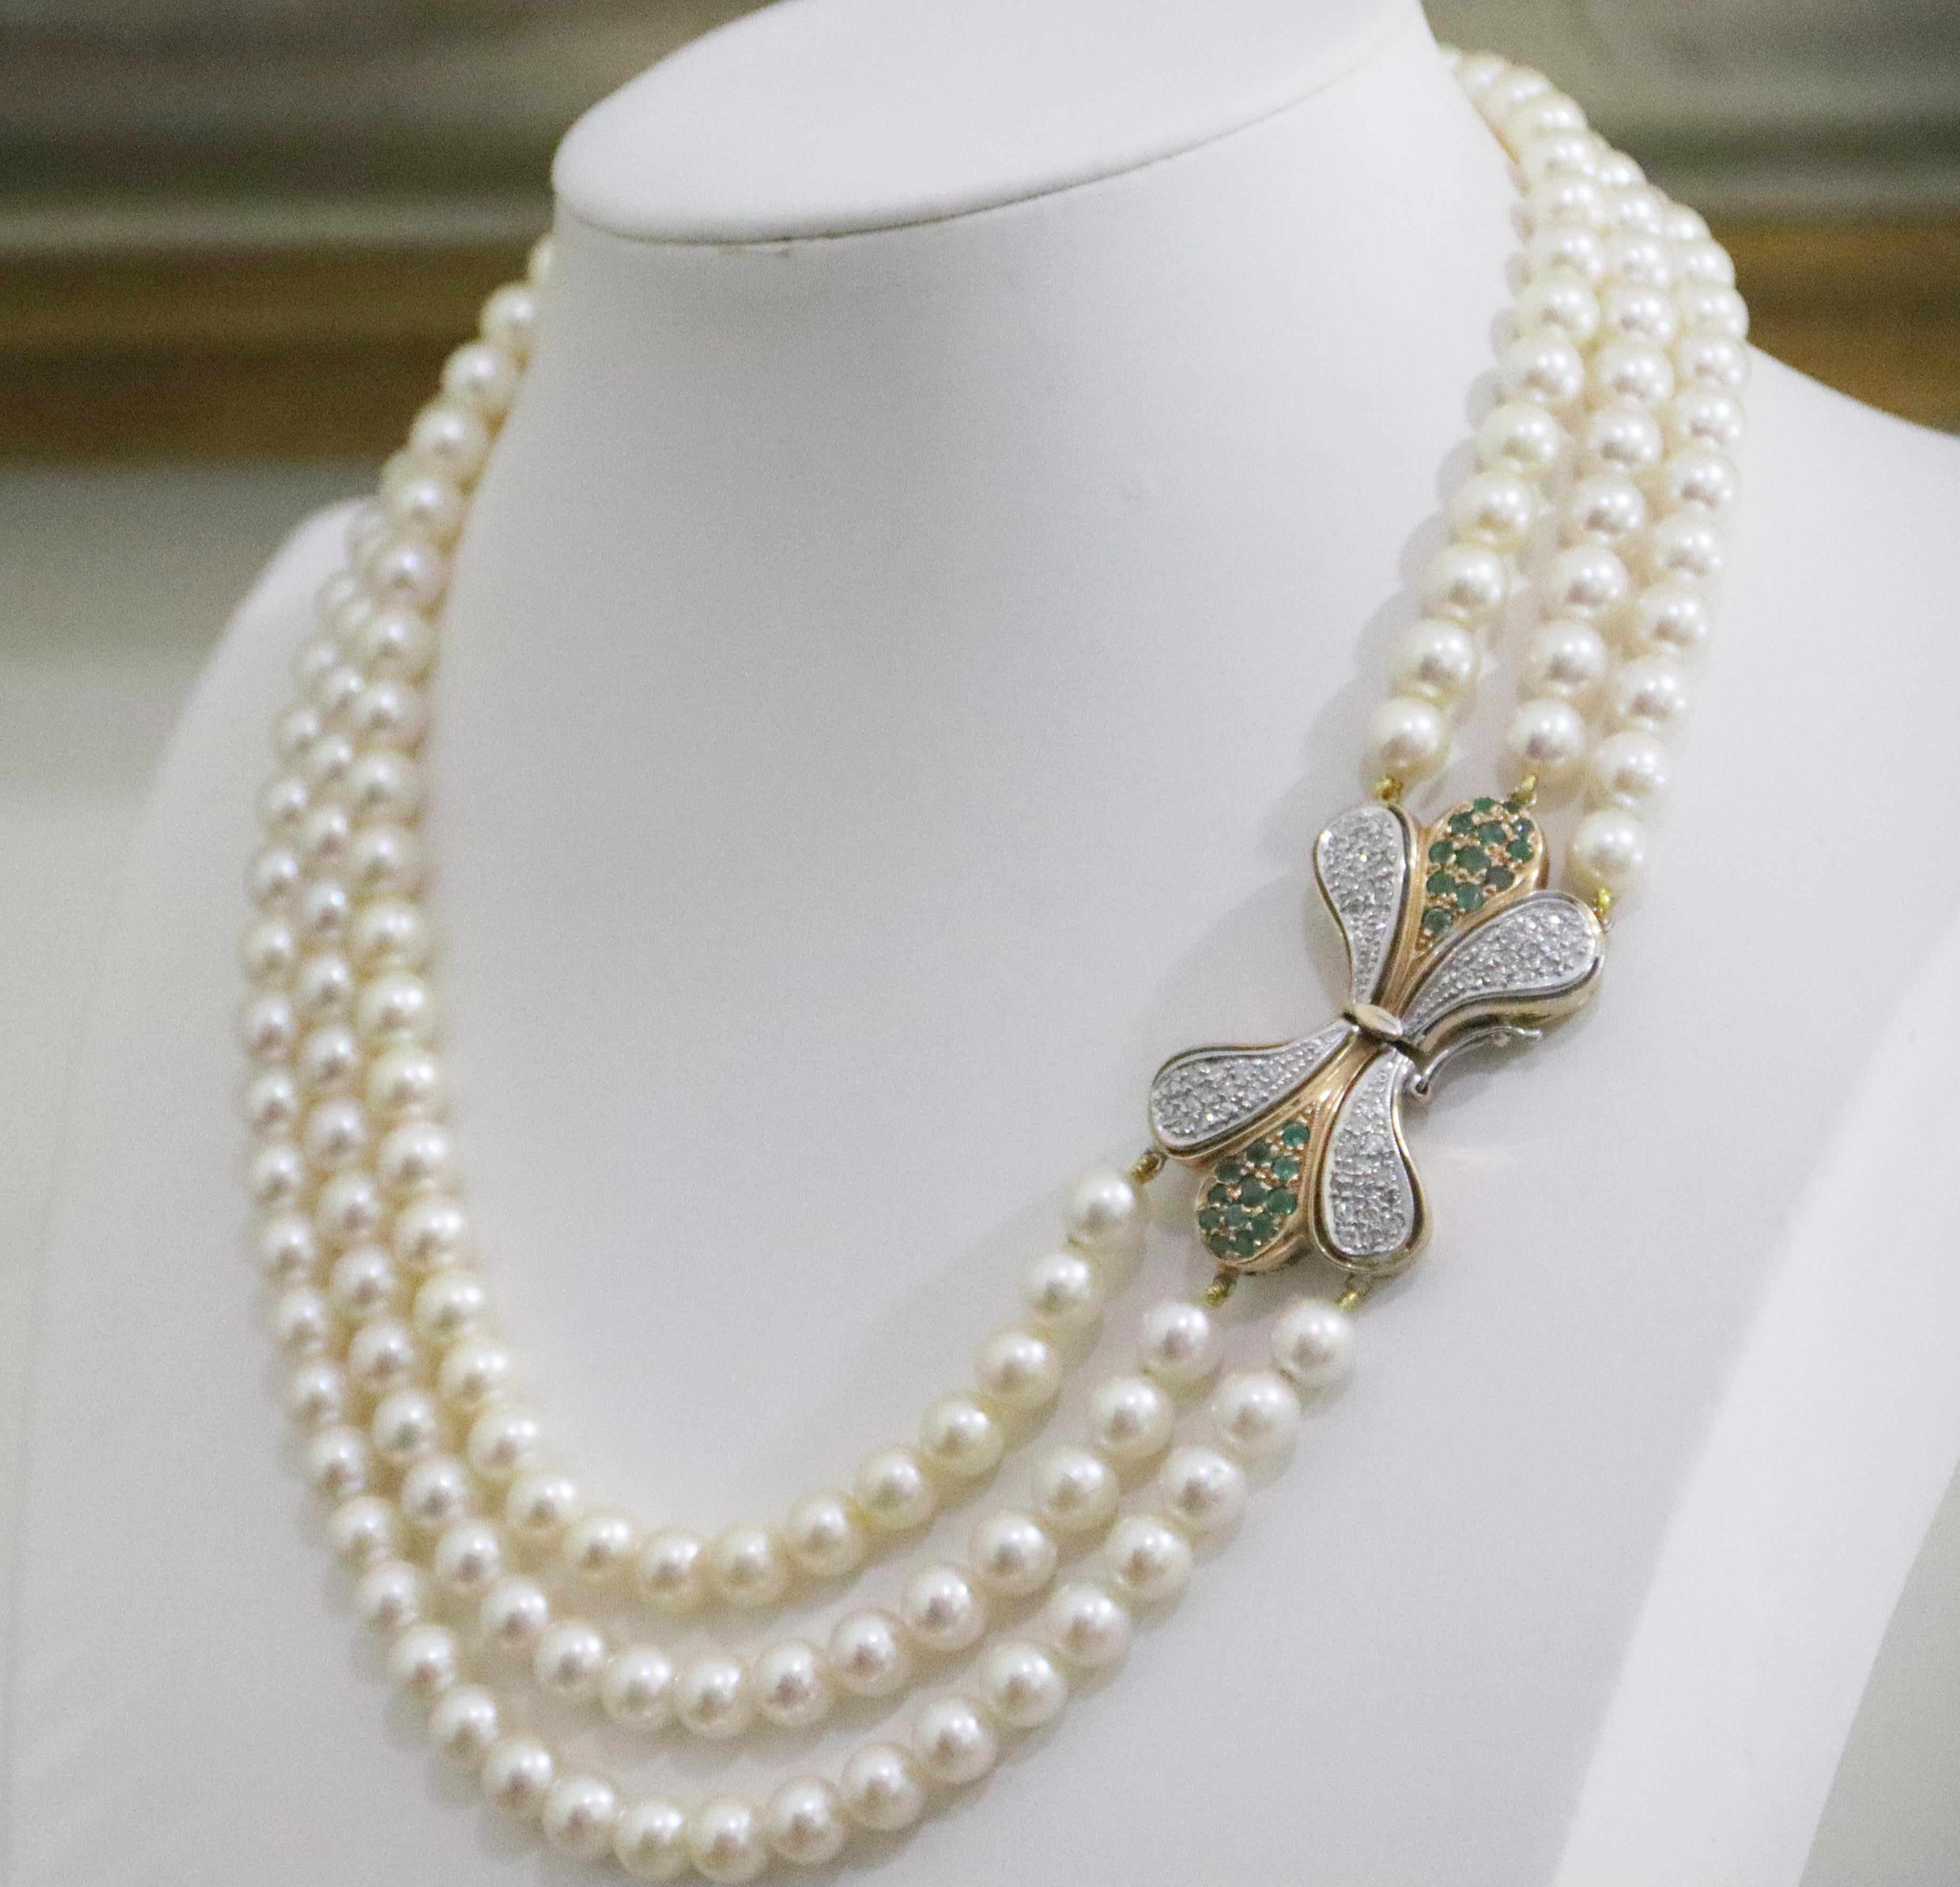 Women's Pearls Diamonds Emeralds 18 Karat White And Yellow Gold Multi-Strand Necklace For Sale